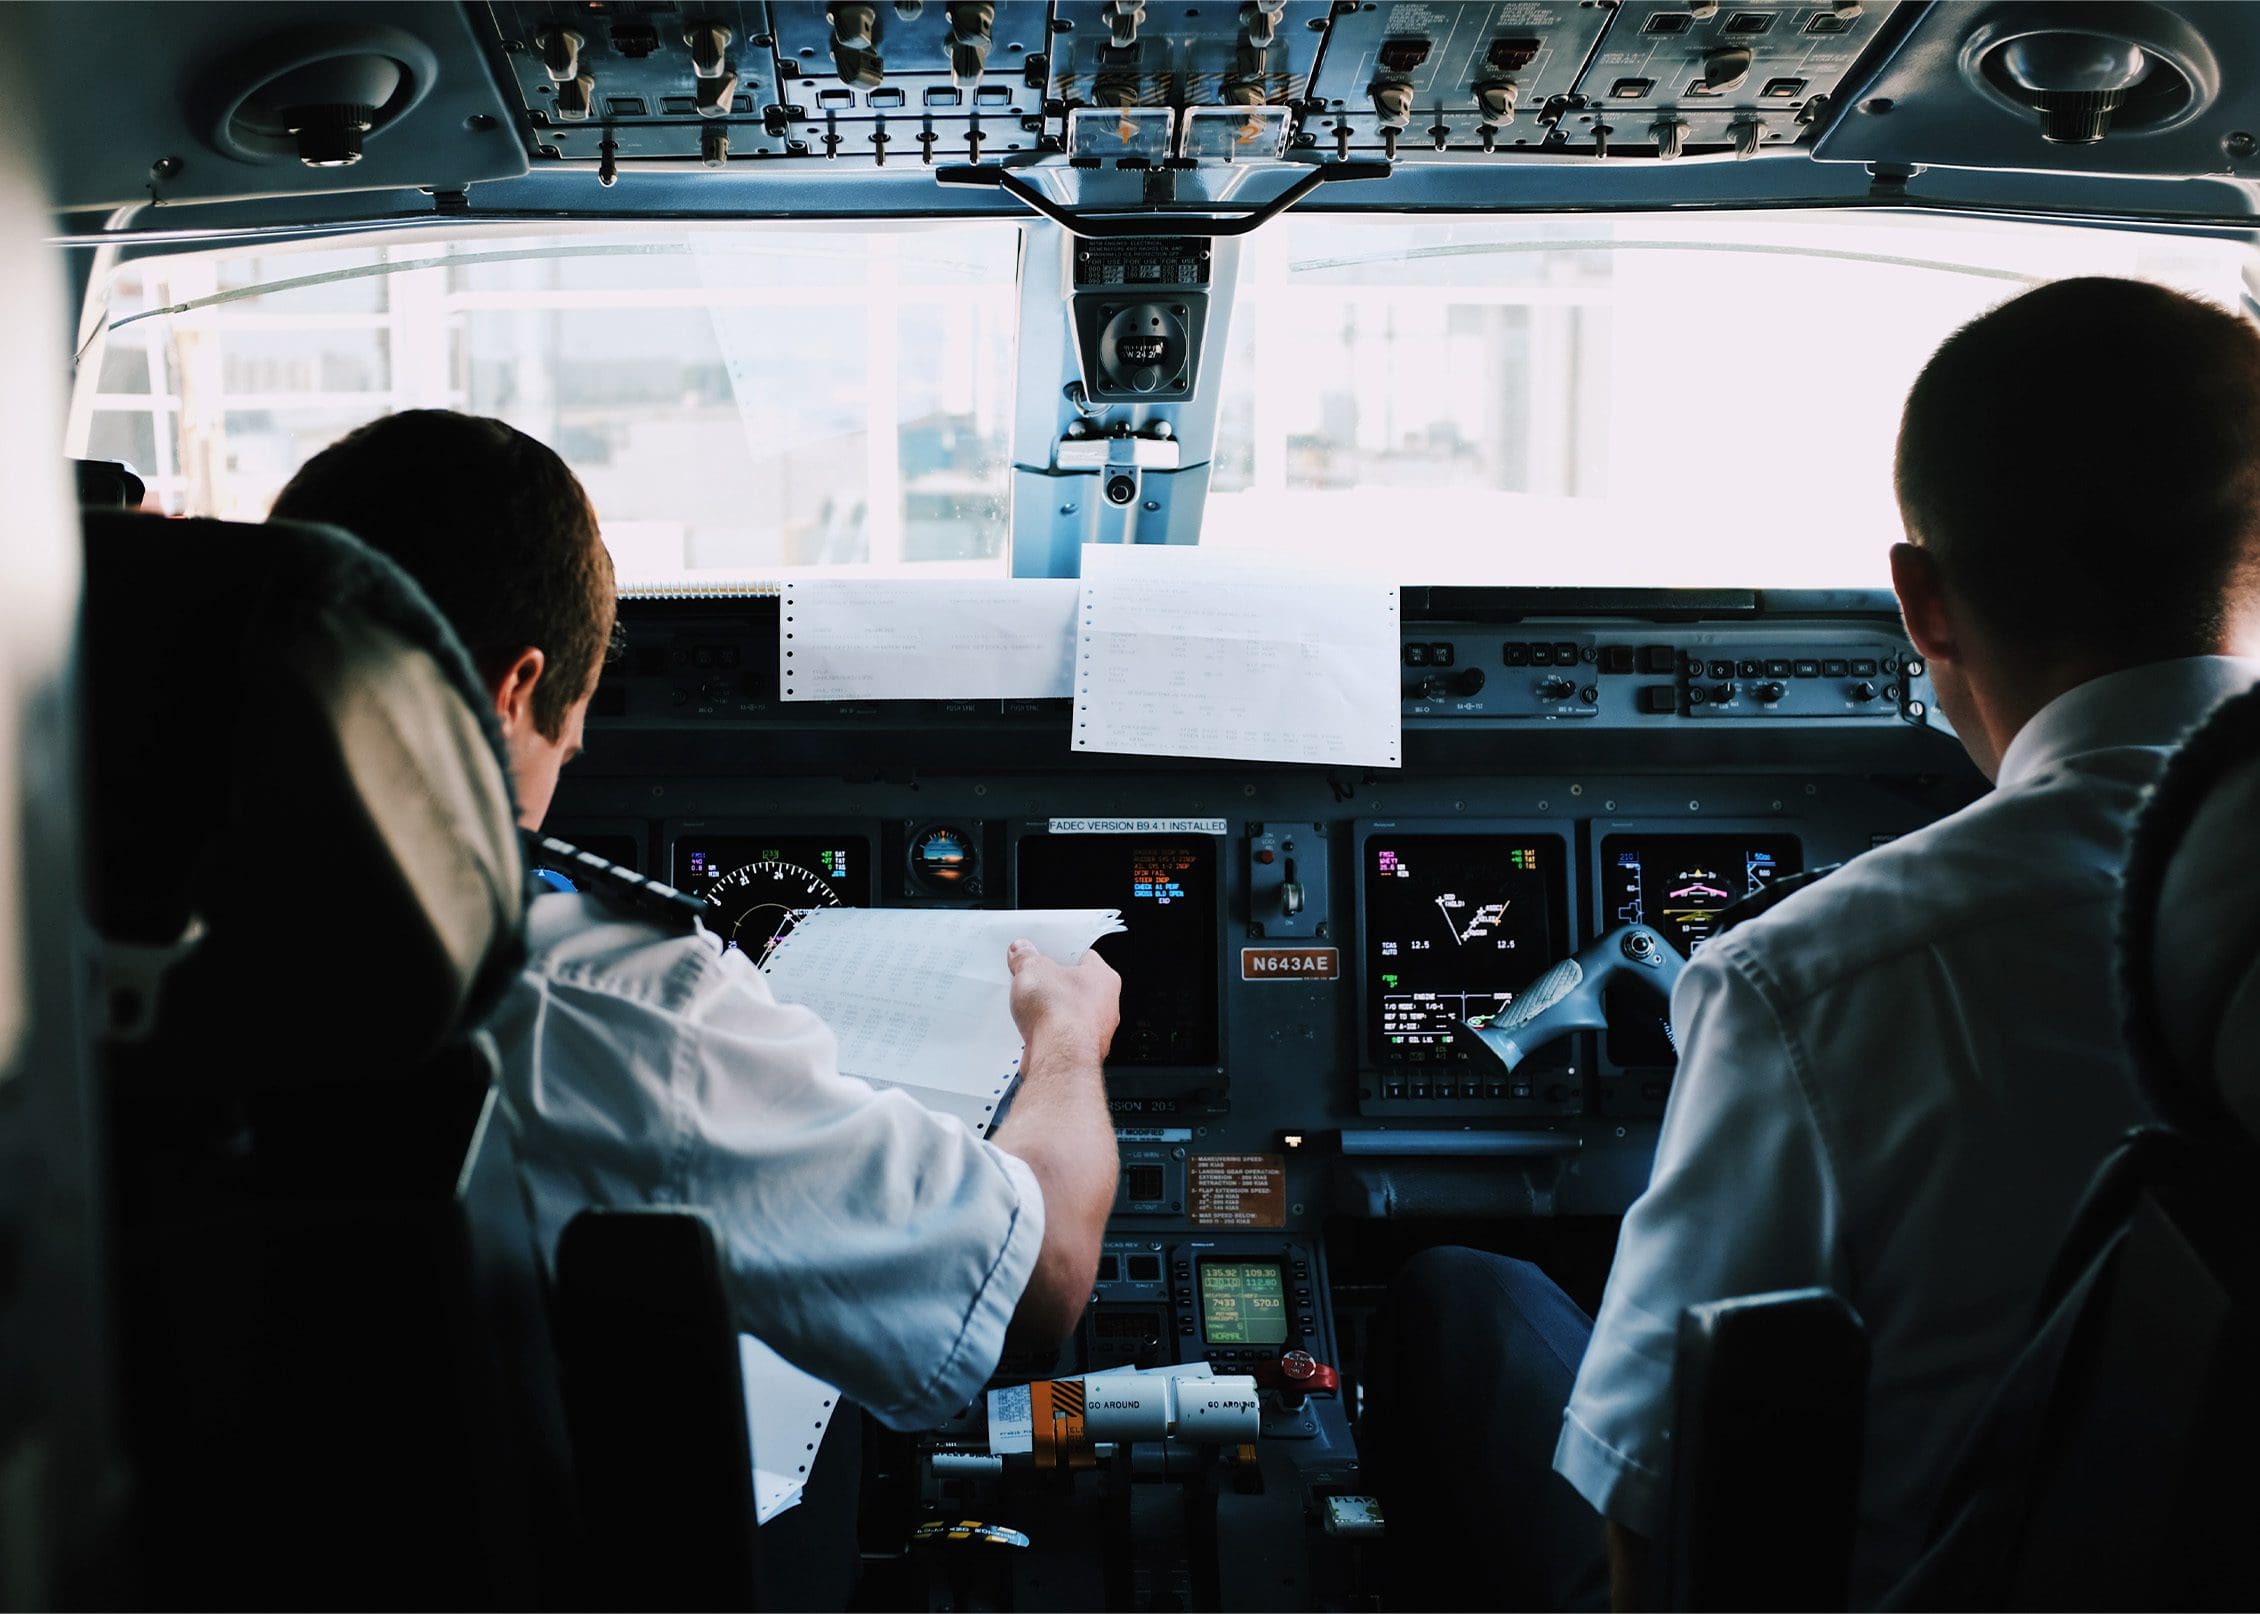 Two pilots sat in the cockpit of a Nexus Airlines plane overlooking documents